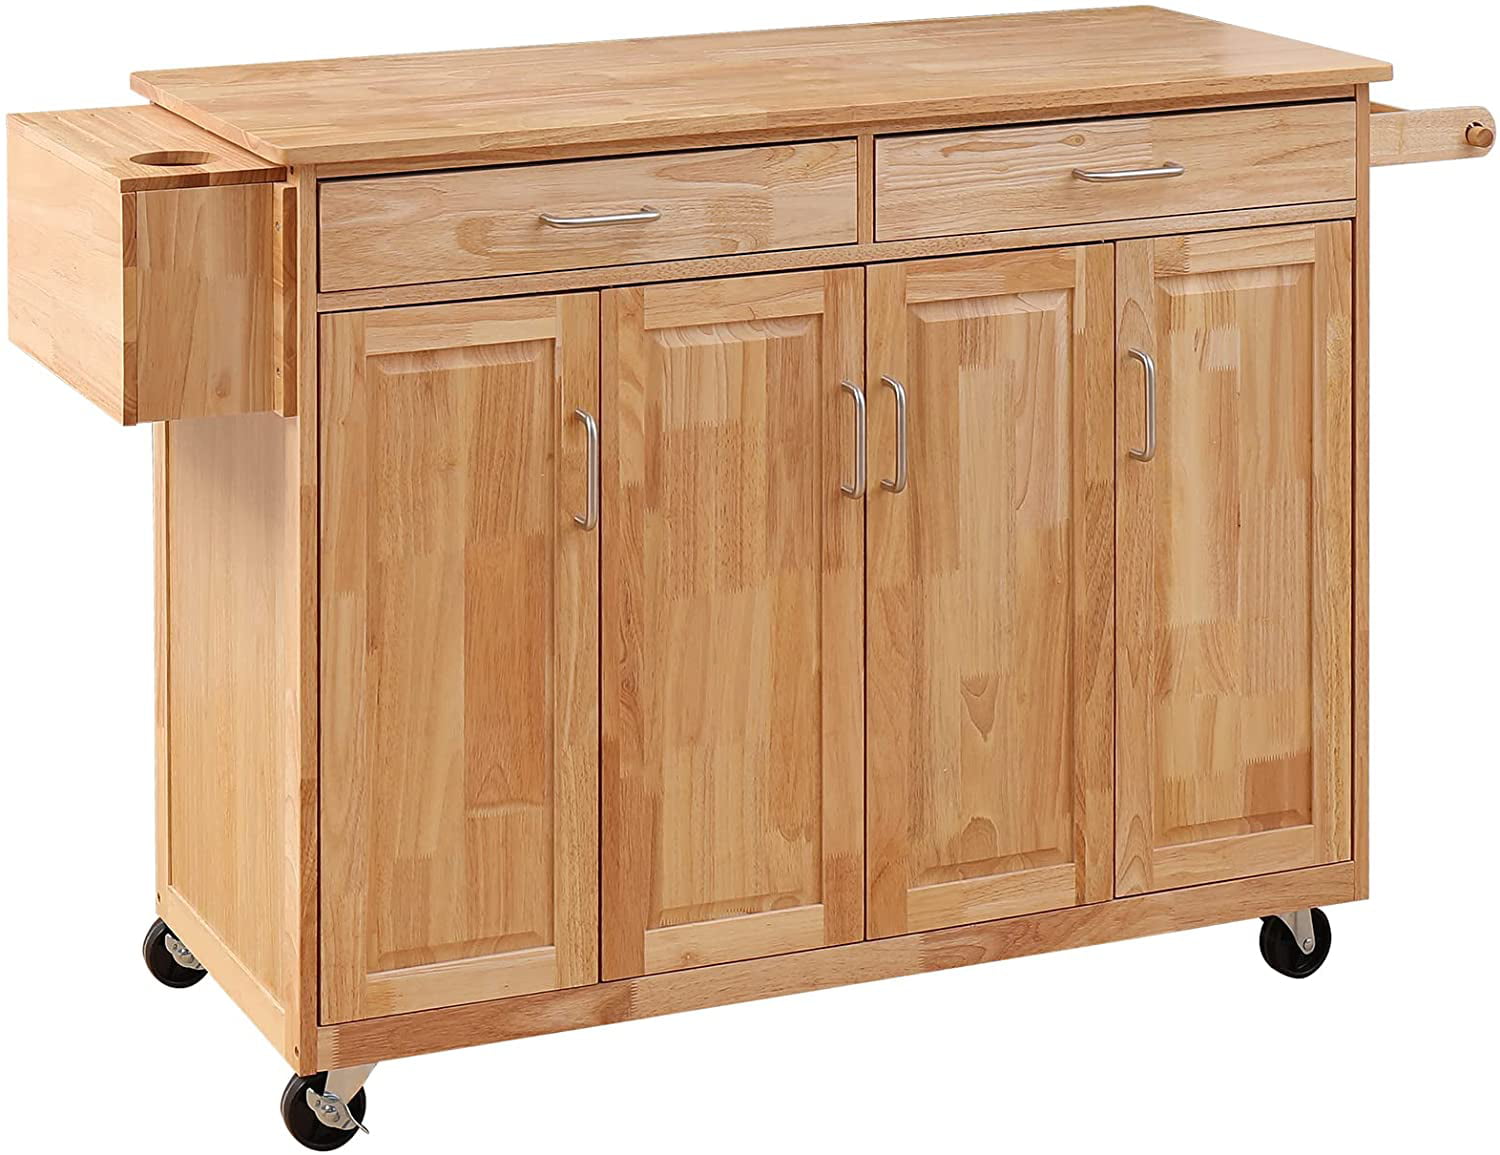 Yoleny Wooden Sideboard Buffet Cabinet with Wheels， Rolling Kitchen Cart with Drawers 54